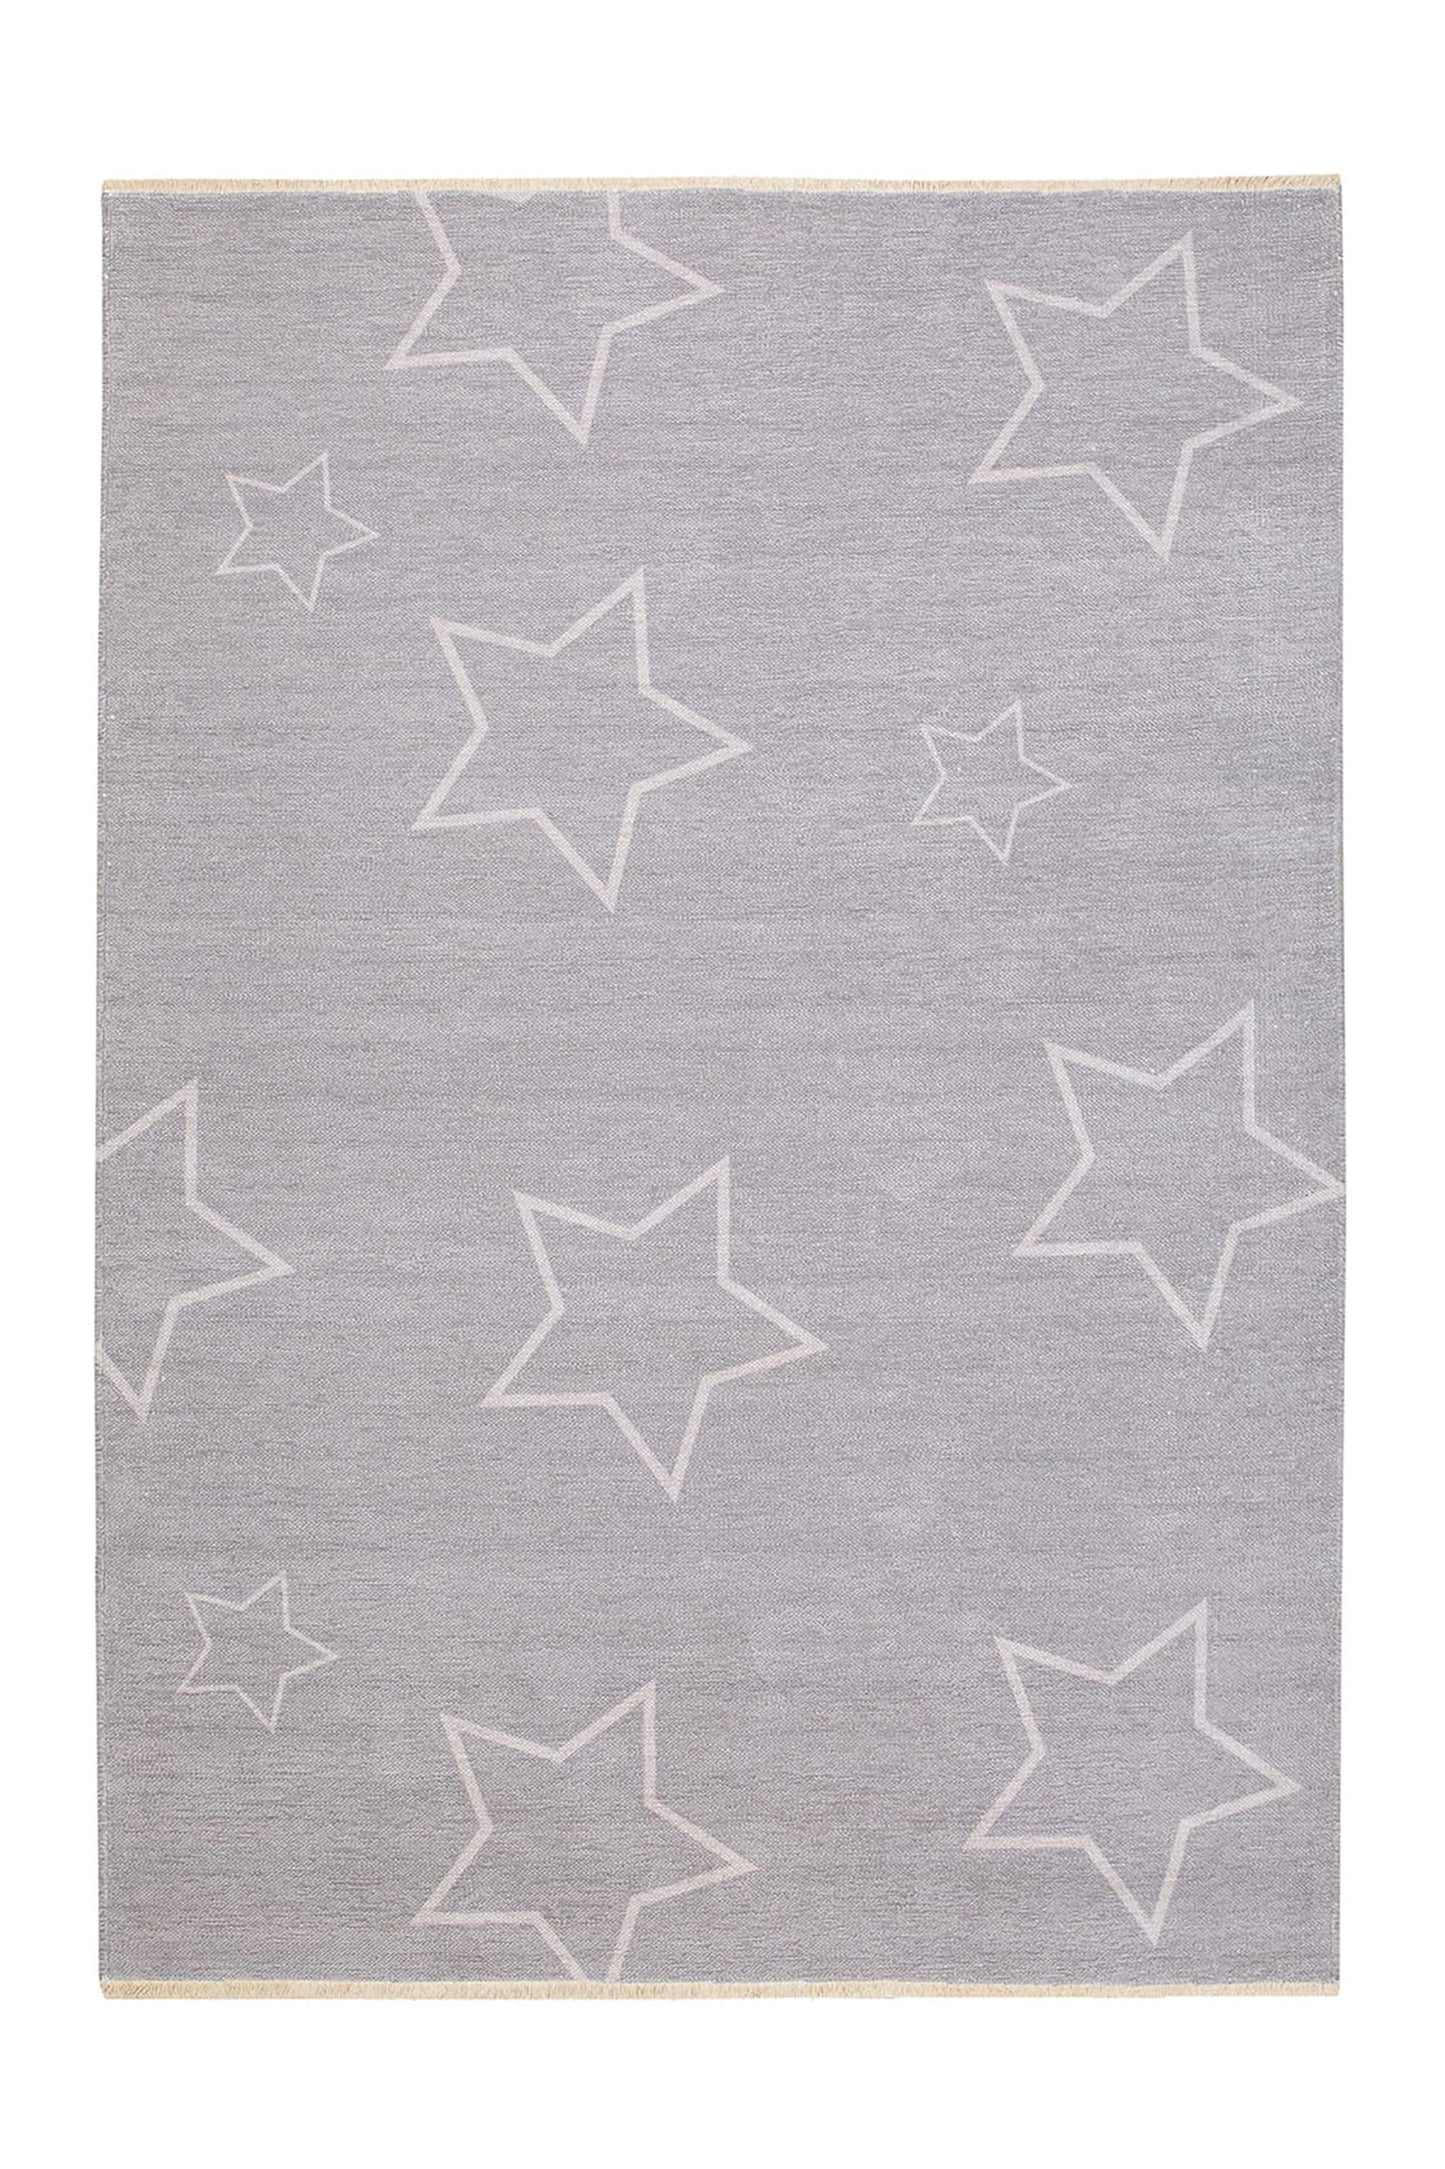 Remi | Star Design Rugs, Turkish Gray rug, Vintage looks, Star, Contemporary Design, Home decor, Modern Area Rugs For Living Room Bedroom